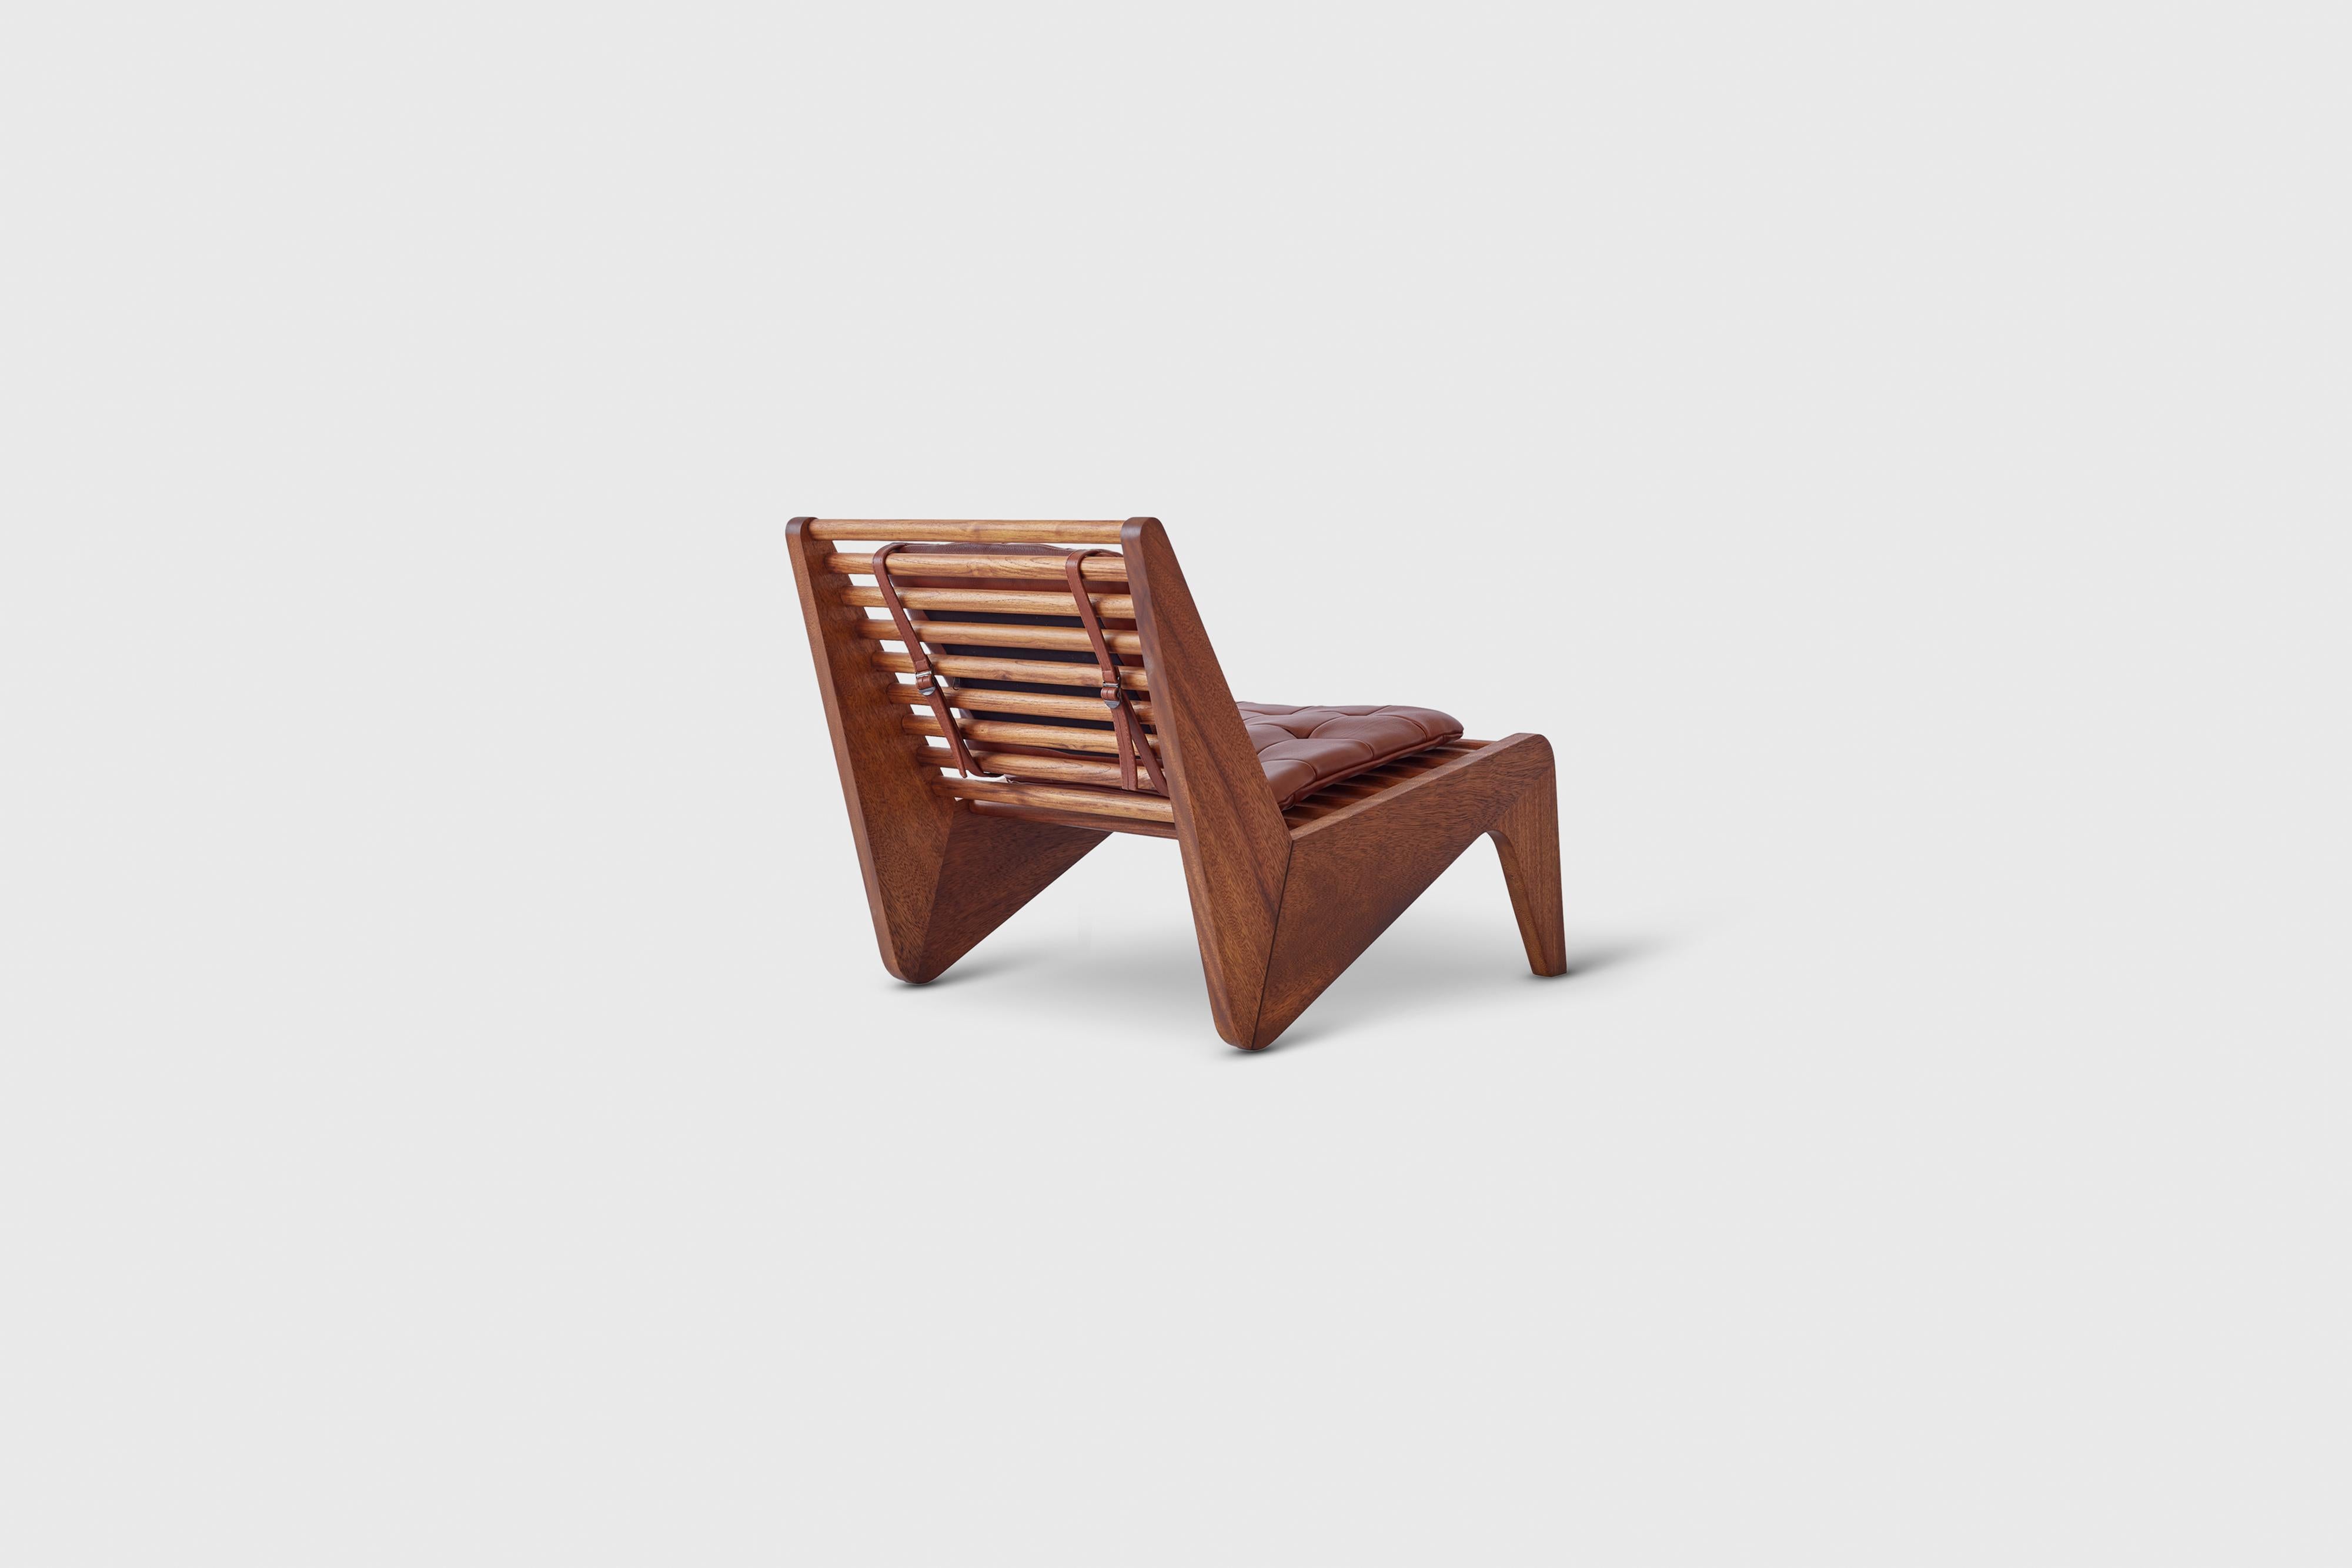 Mexican Brown Ala Lounge Chair by Atra Design